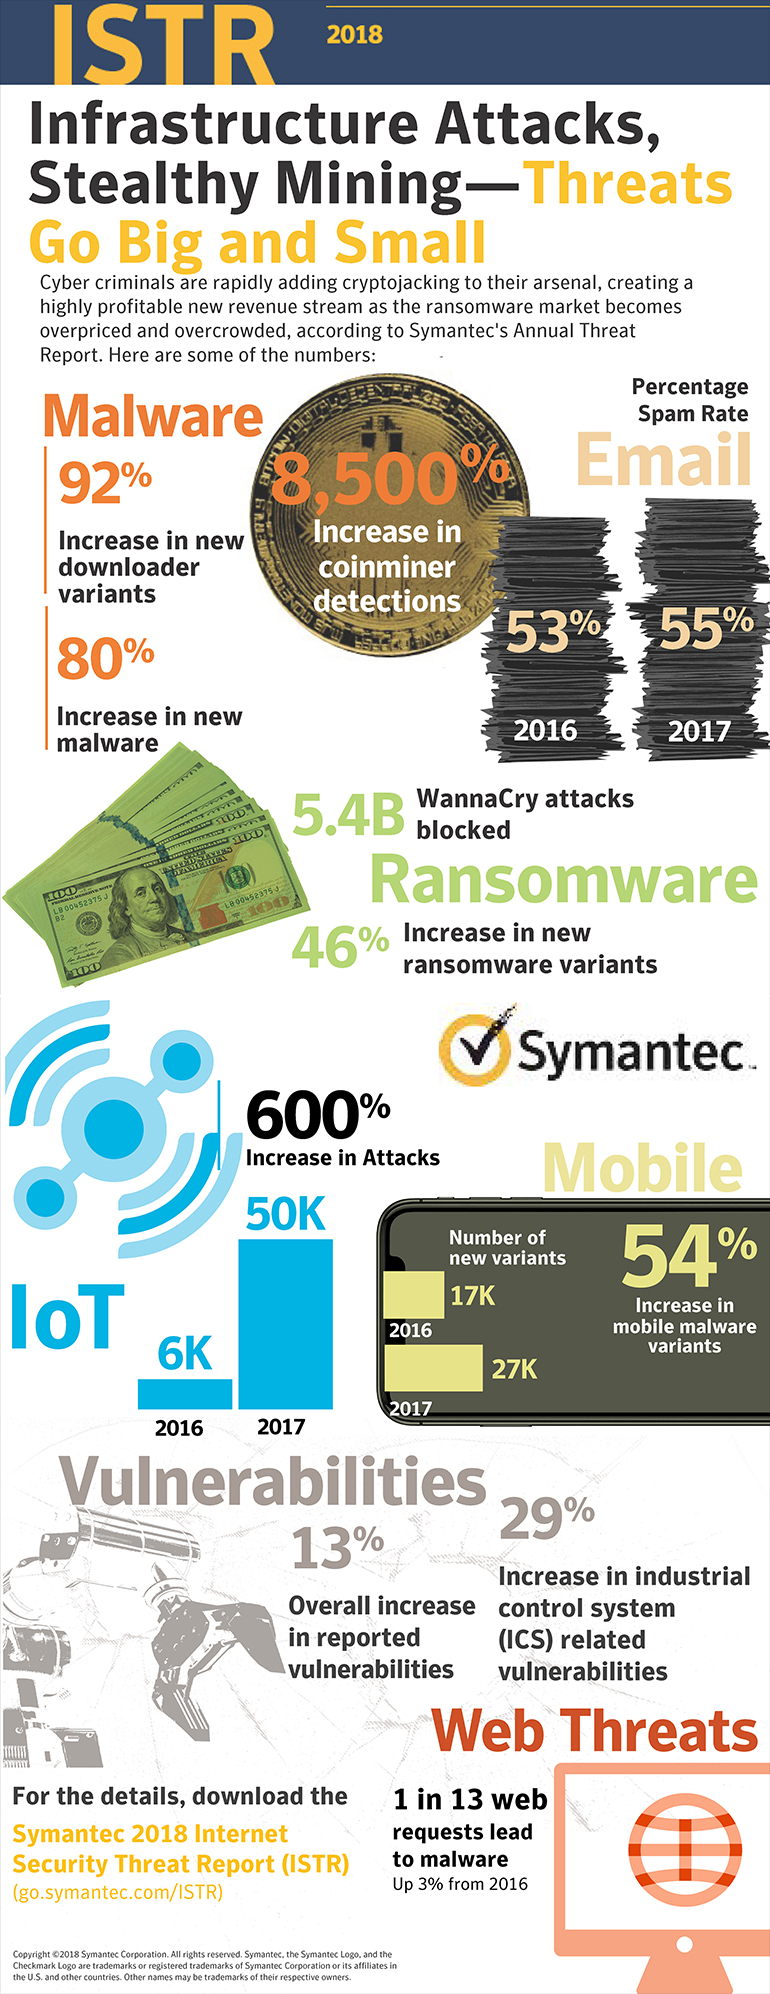 Key Findings From the Symantec Threat Report infographic